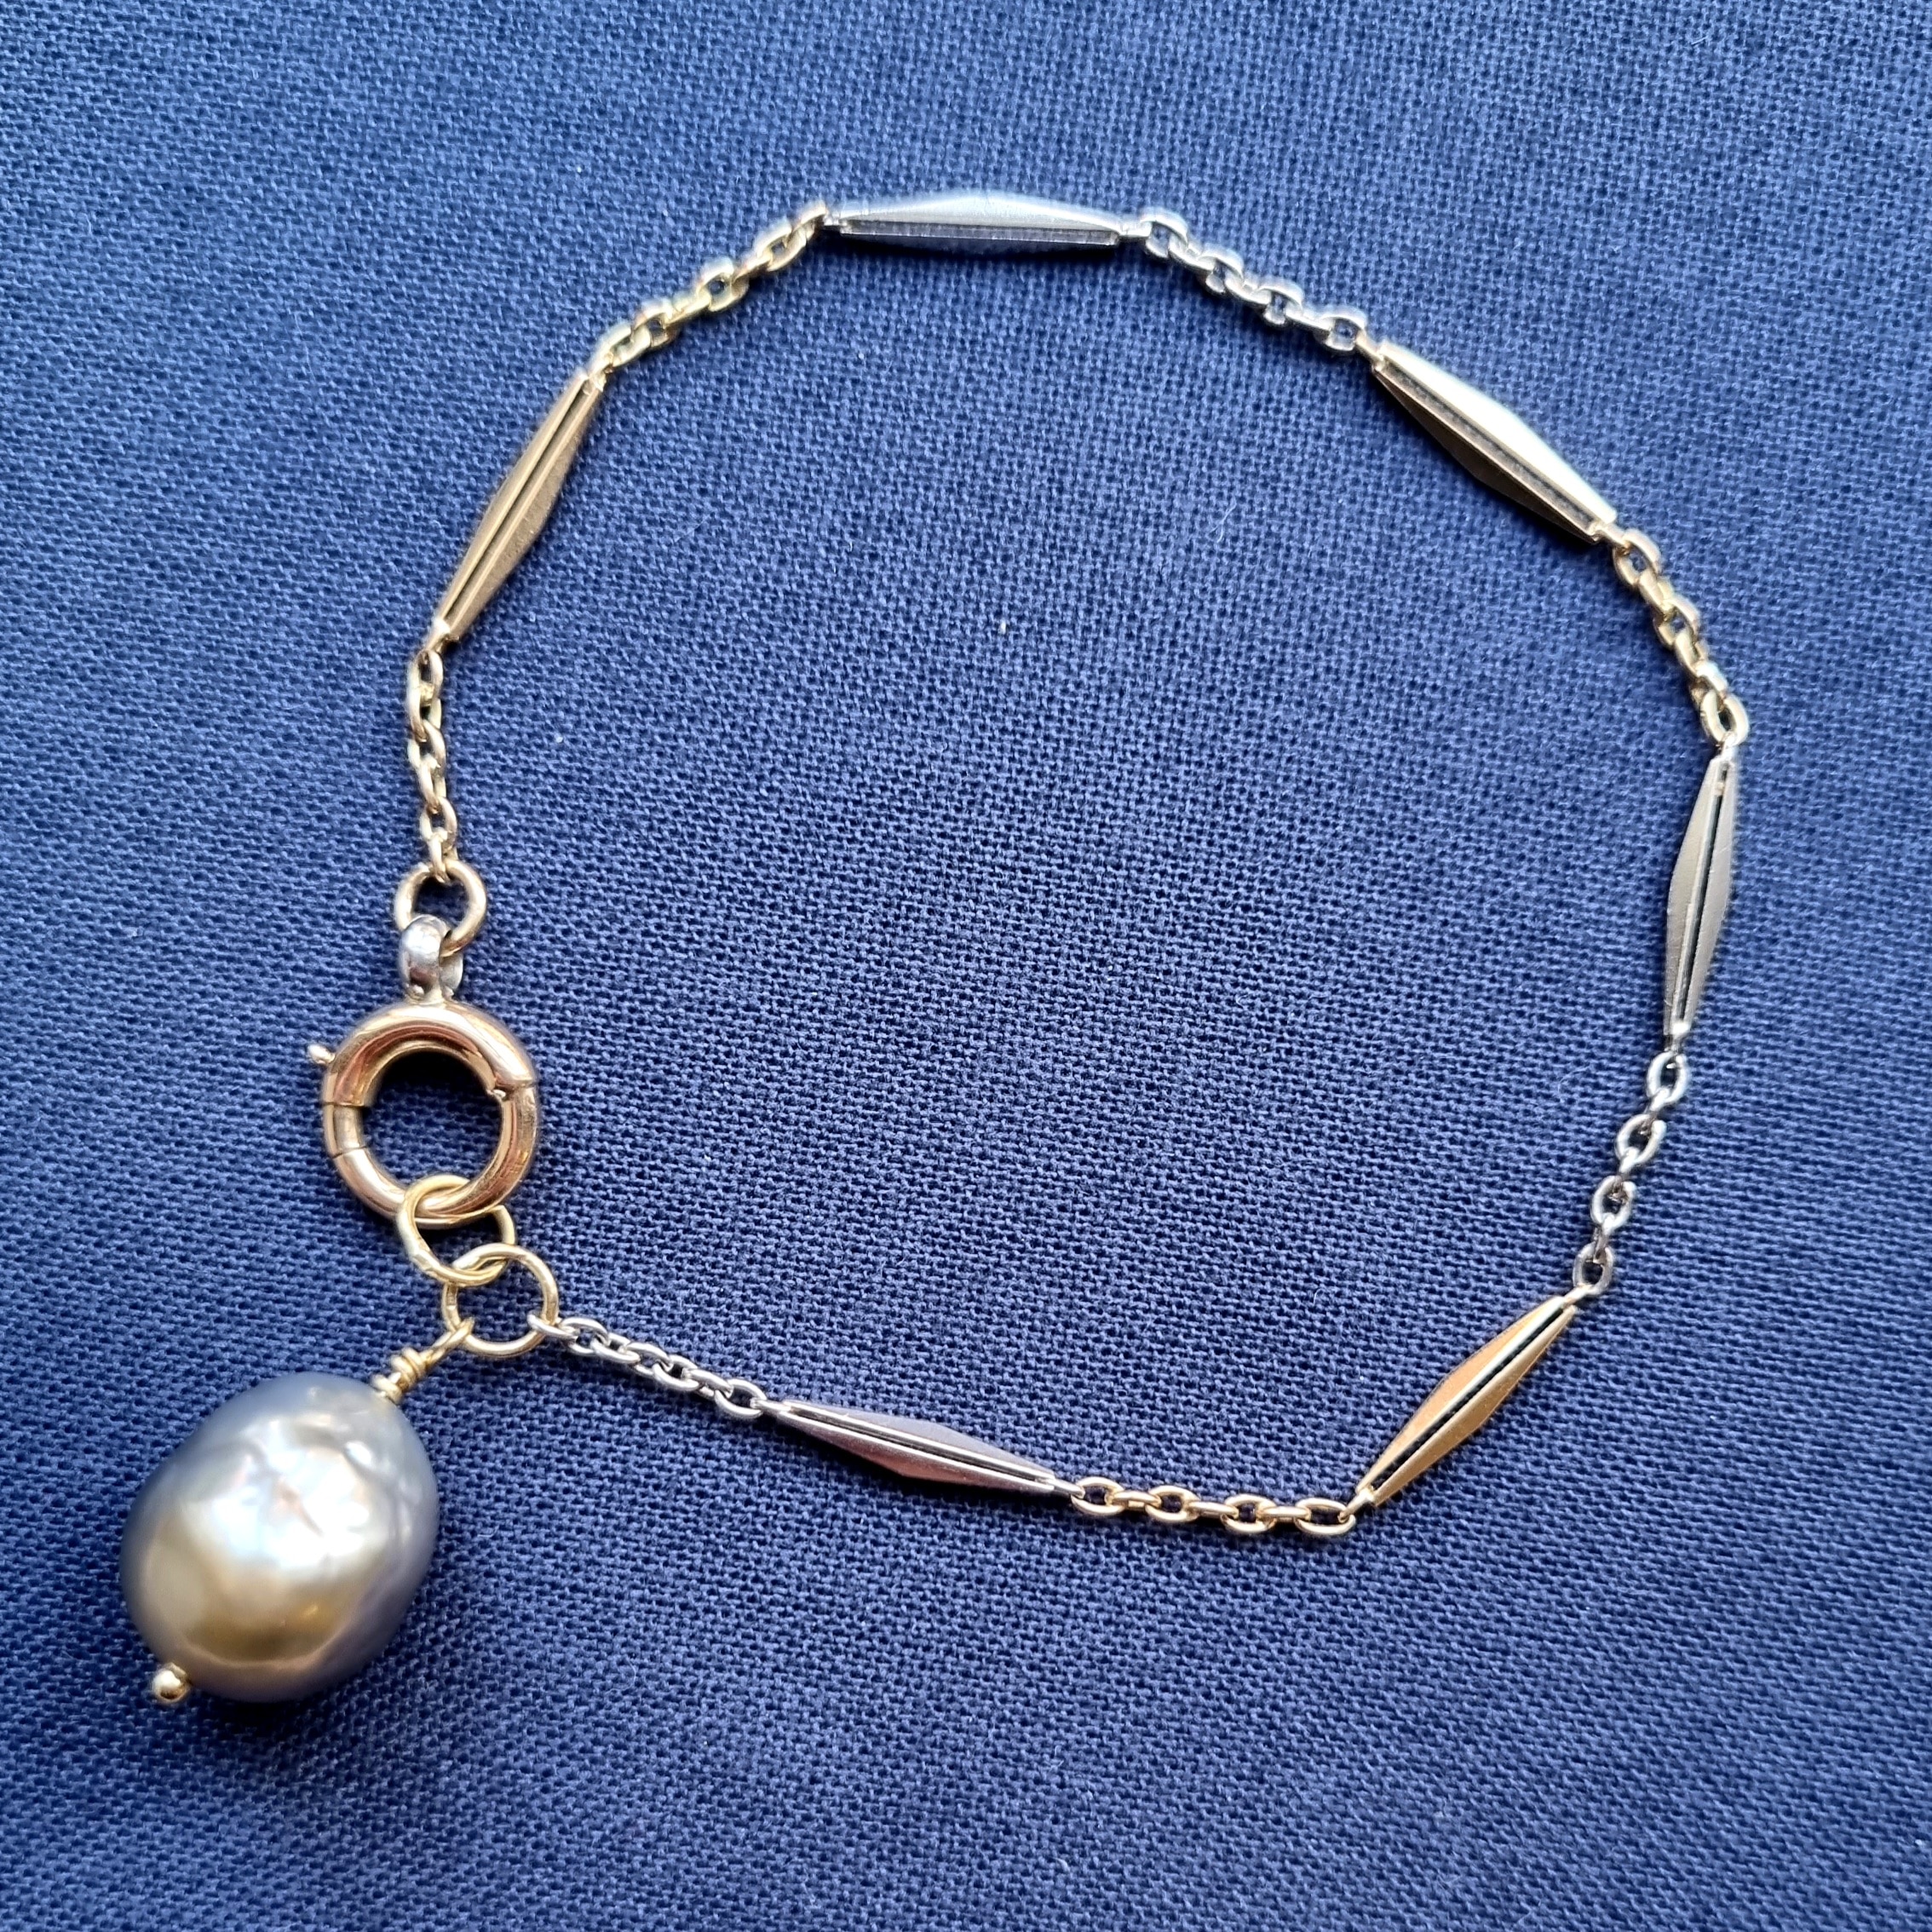 A Platinum & 18k Yellow Gold Bracelet with Tahitian Pearl